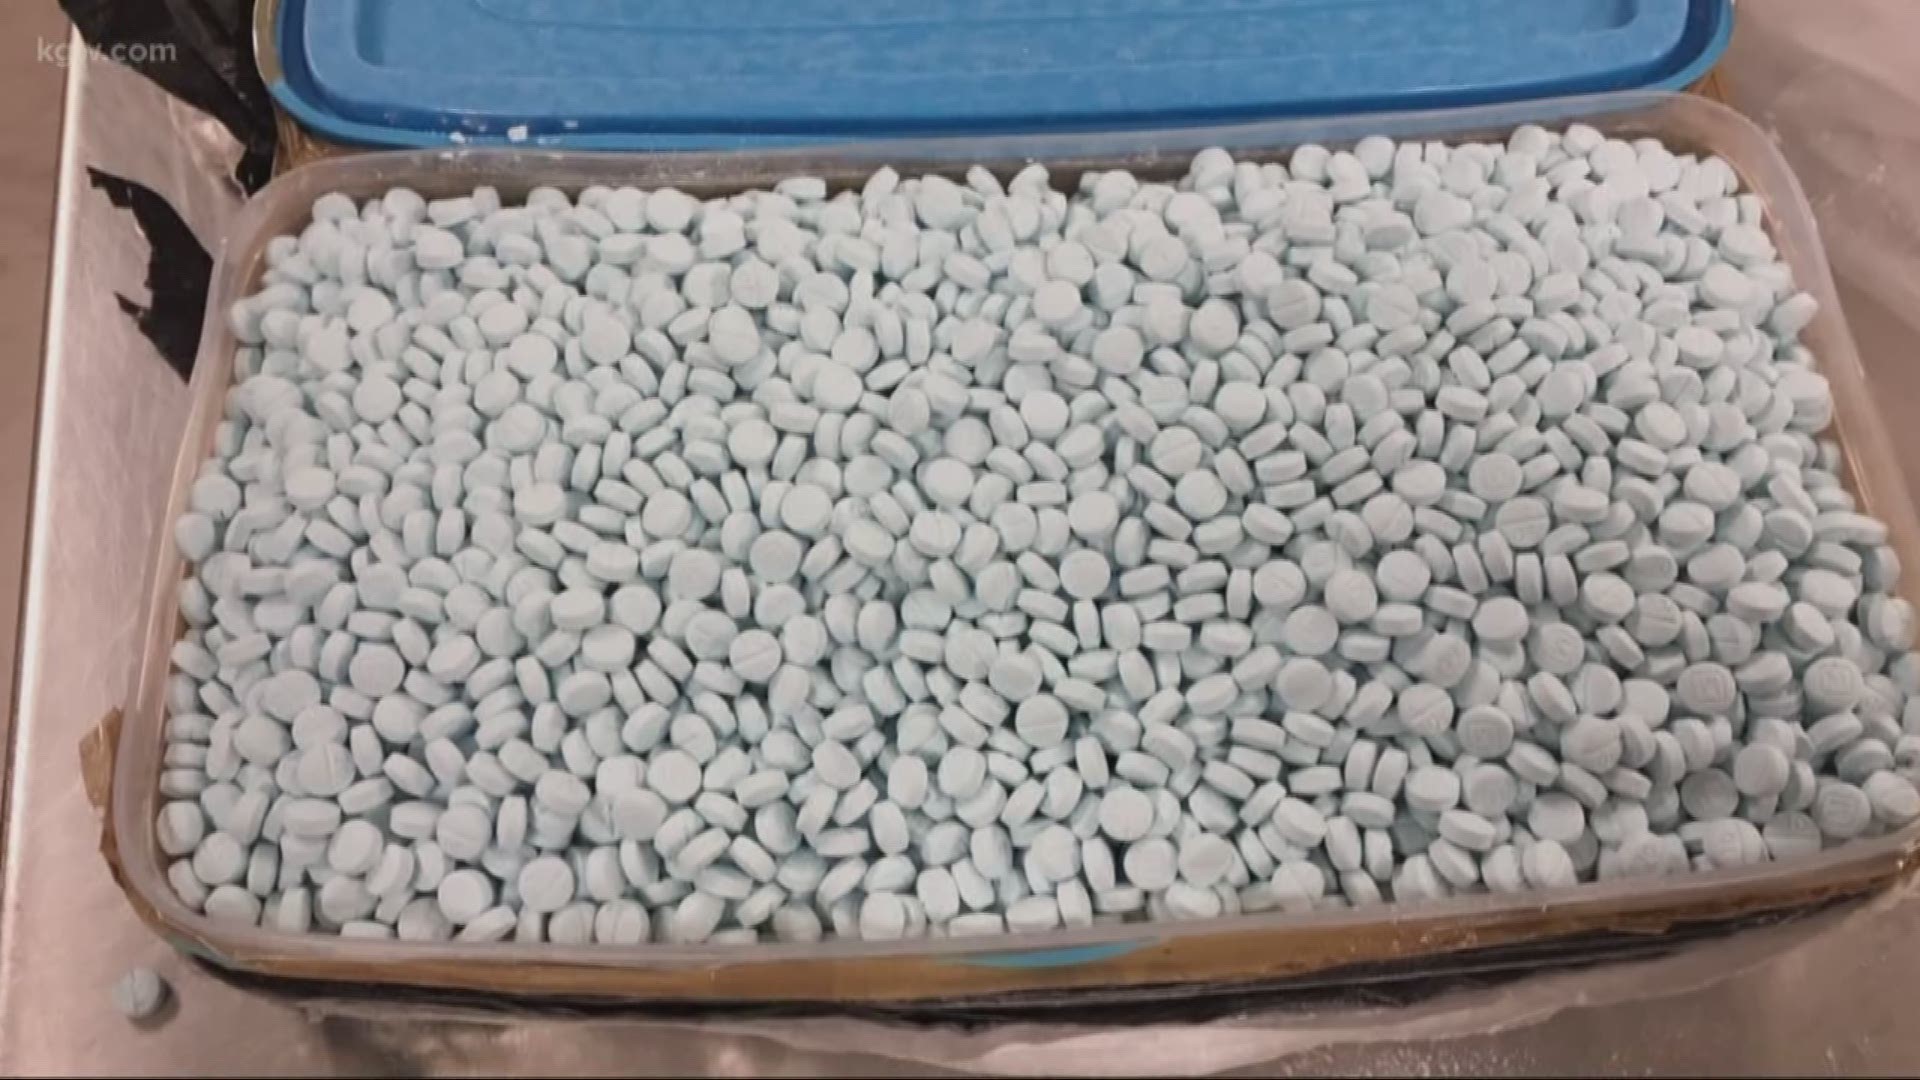 The Drug Enforcement Administration and health officials are warning about a big danger from counterfeit pain pills. A large percentage of them could be deadly.